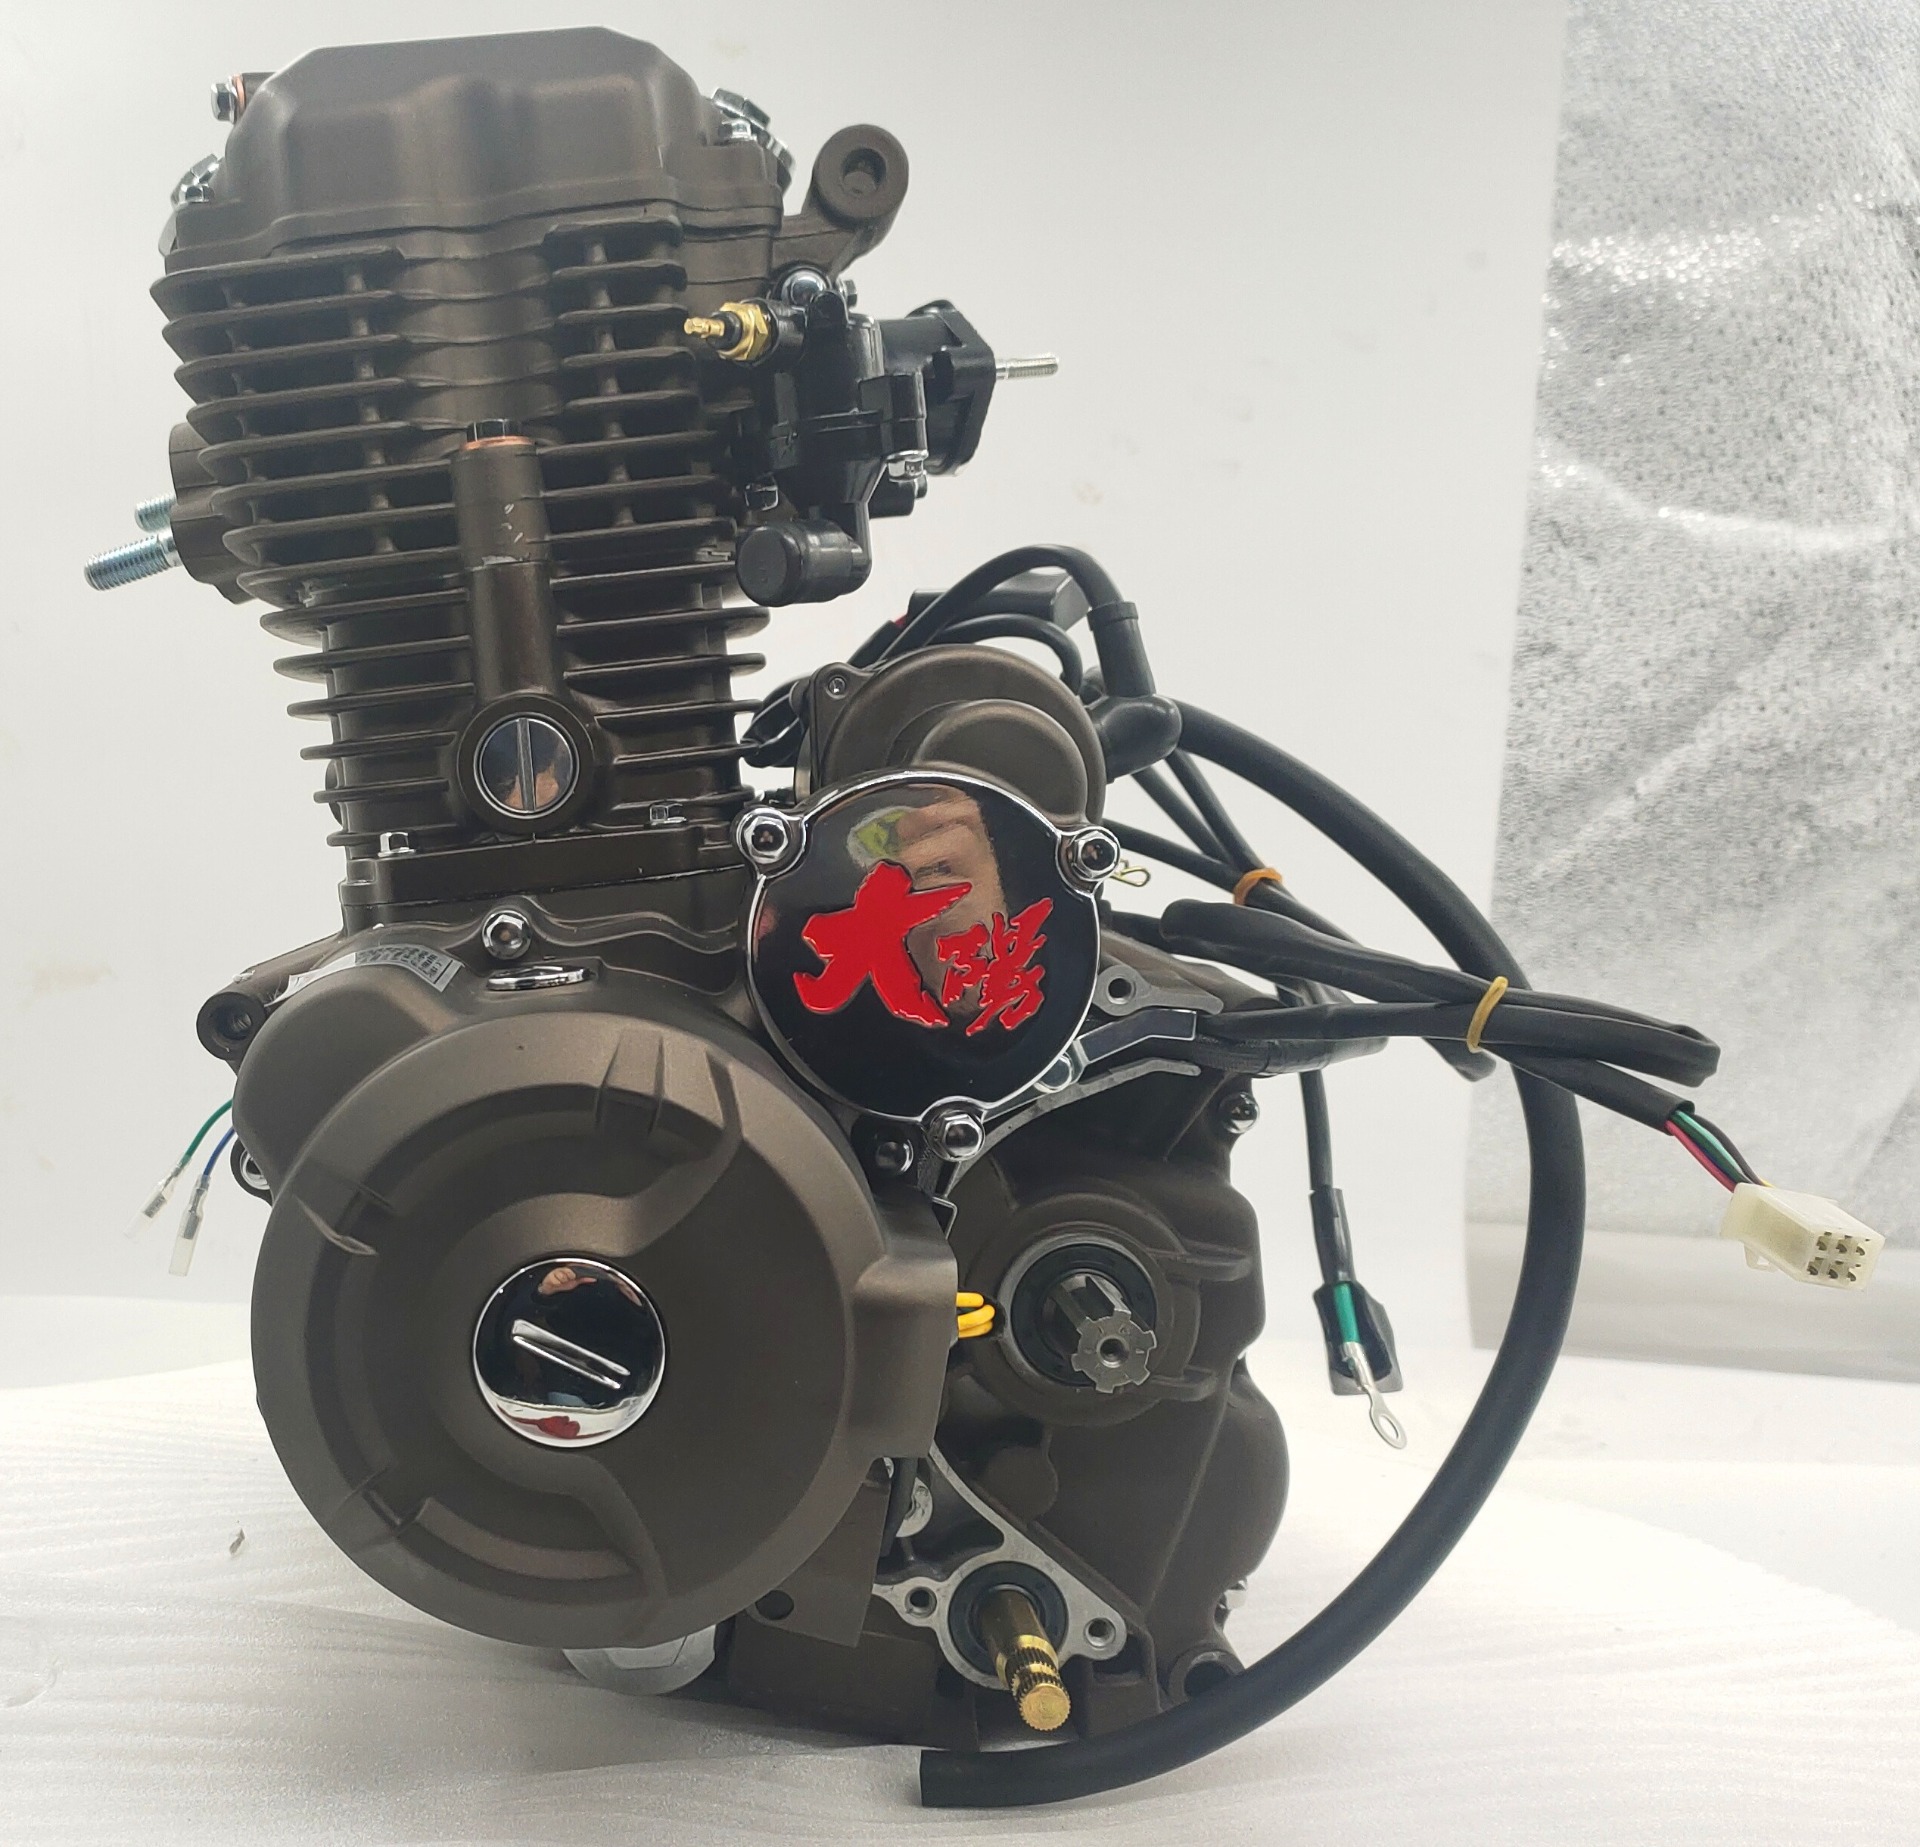 CG200 200cc New Super Cool DAYANG LIFAN Engine Single Cylinder Style Electric/Kick Method Origin Type High Quality made in China